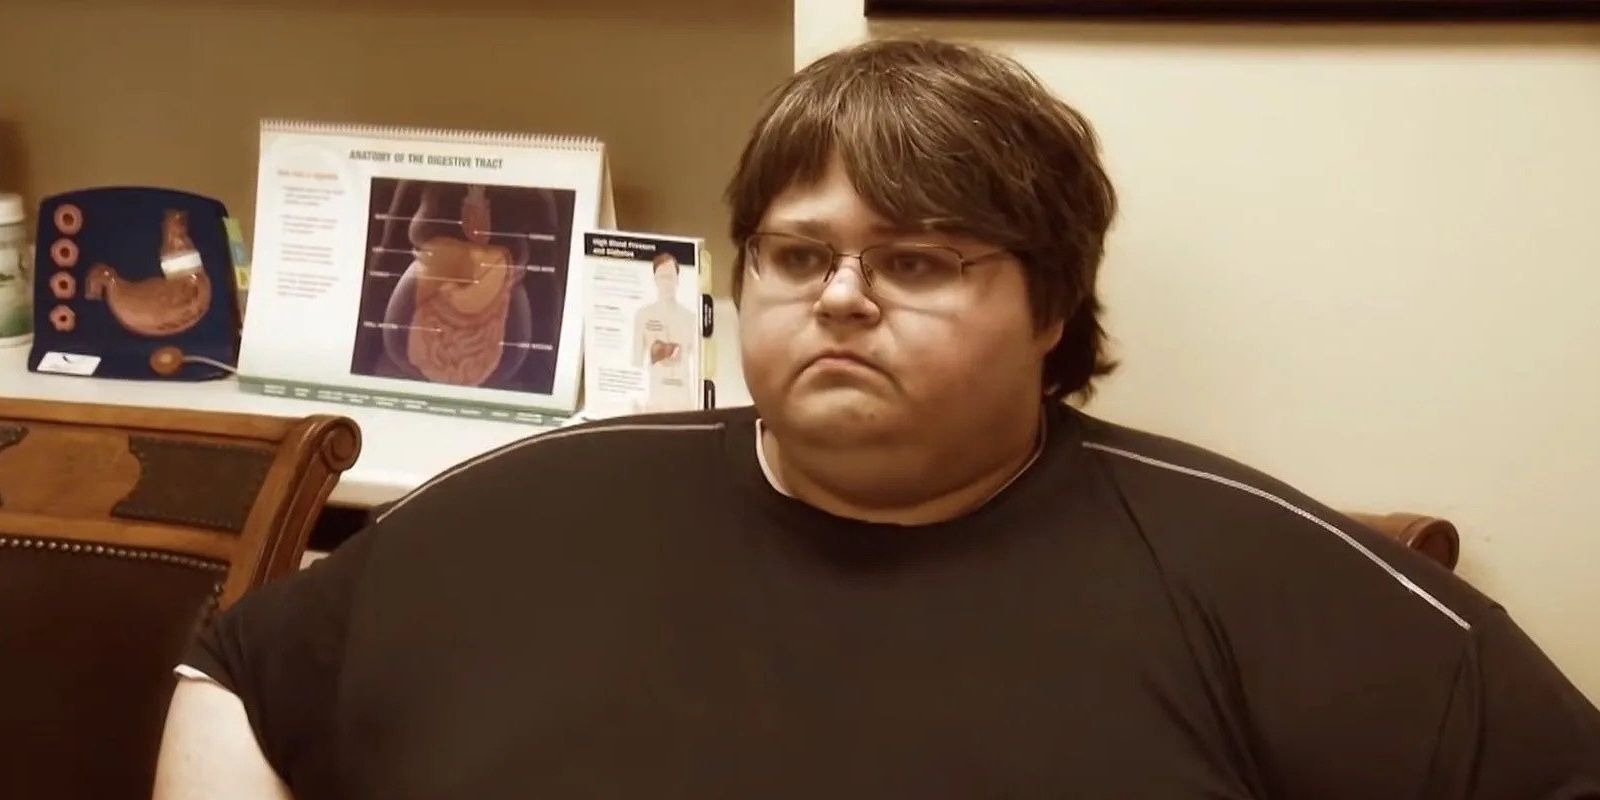 Joe Wexler My 600-Lb Life at a doctor's office looking somber